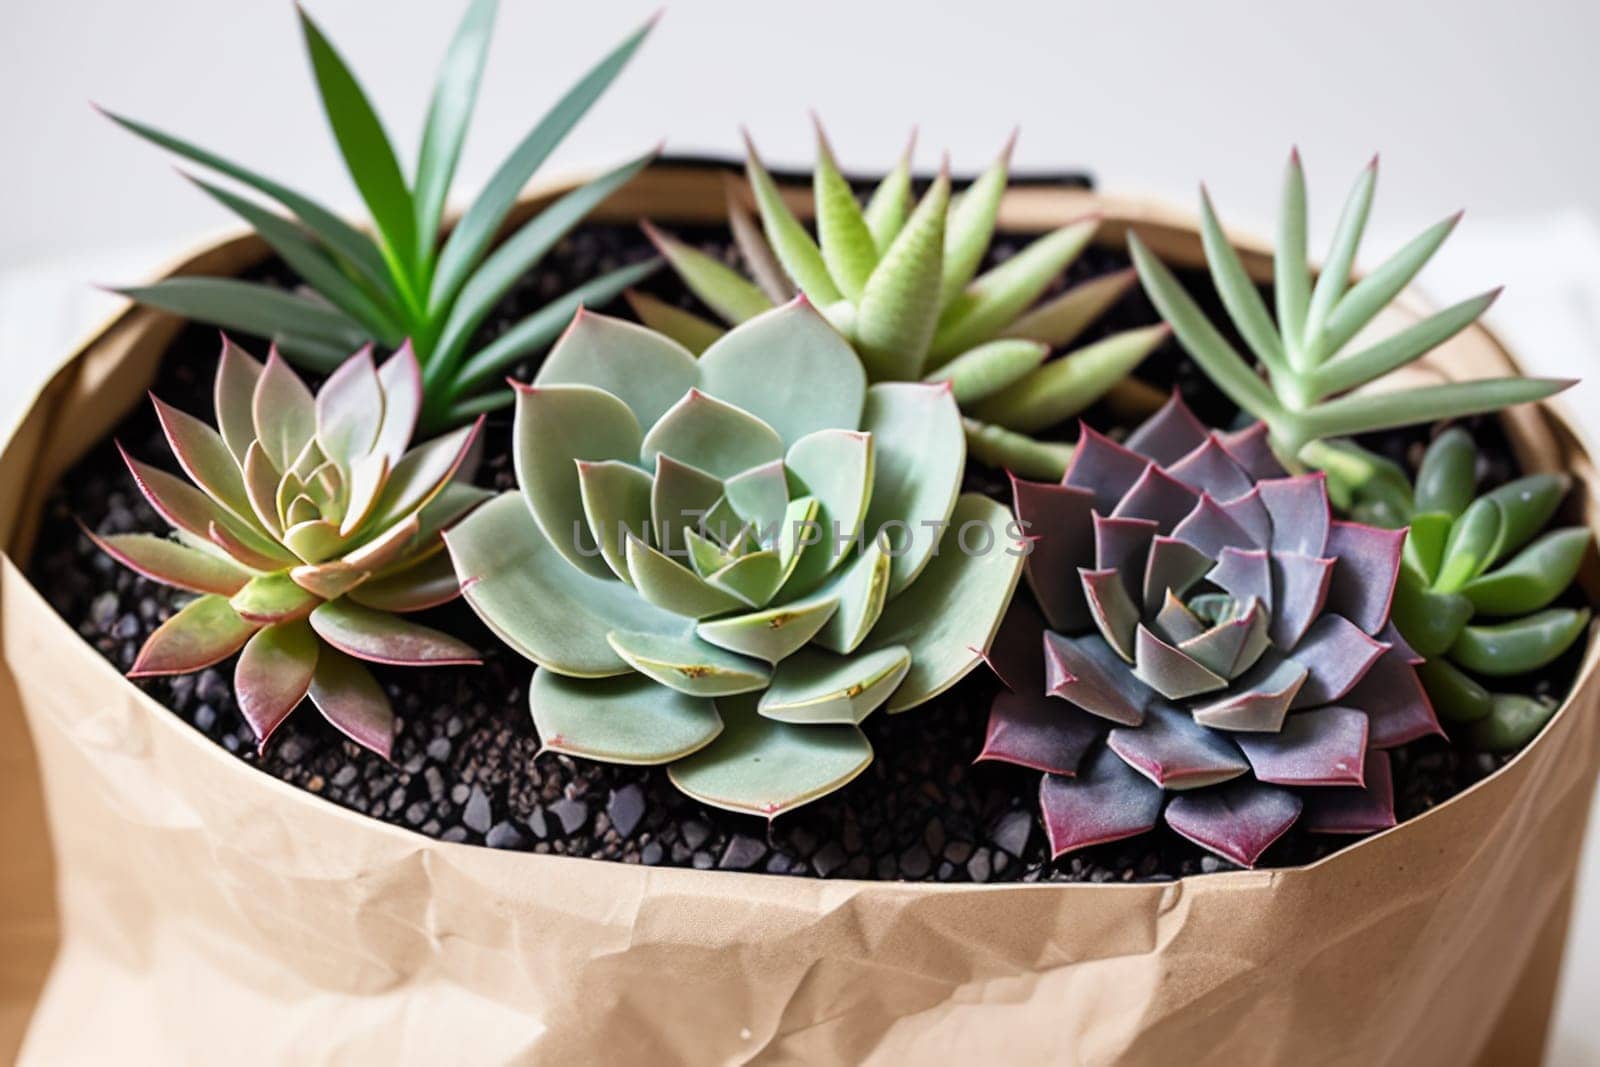 A large set of succulents in an eco-paper bag. Eco-friendly reusable eco-bag and succulents. Shop of indoor plants. by Annu1tochka